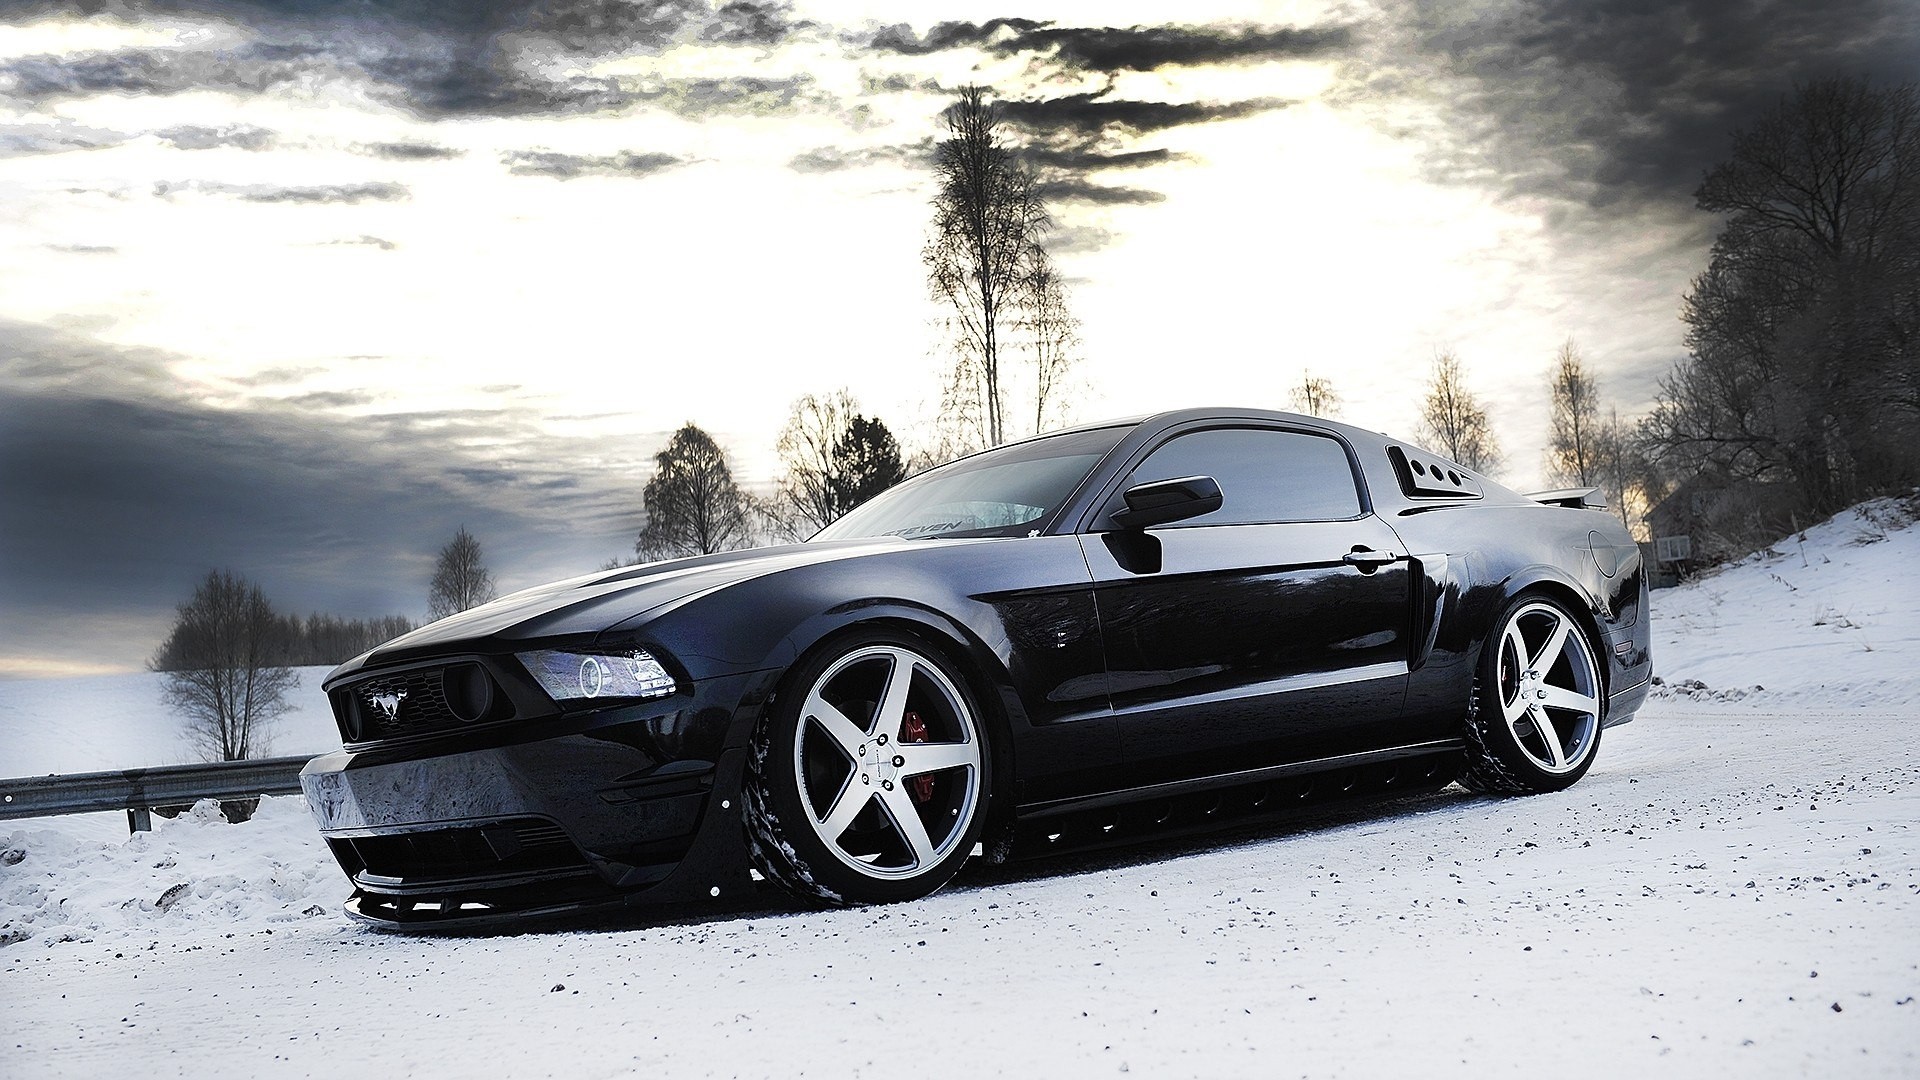 Ford Mustang Windows Theme And Desktop